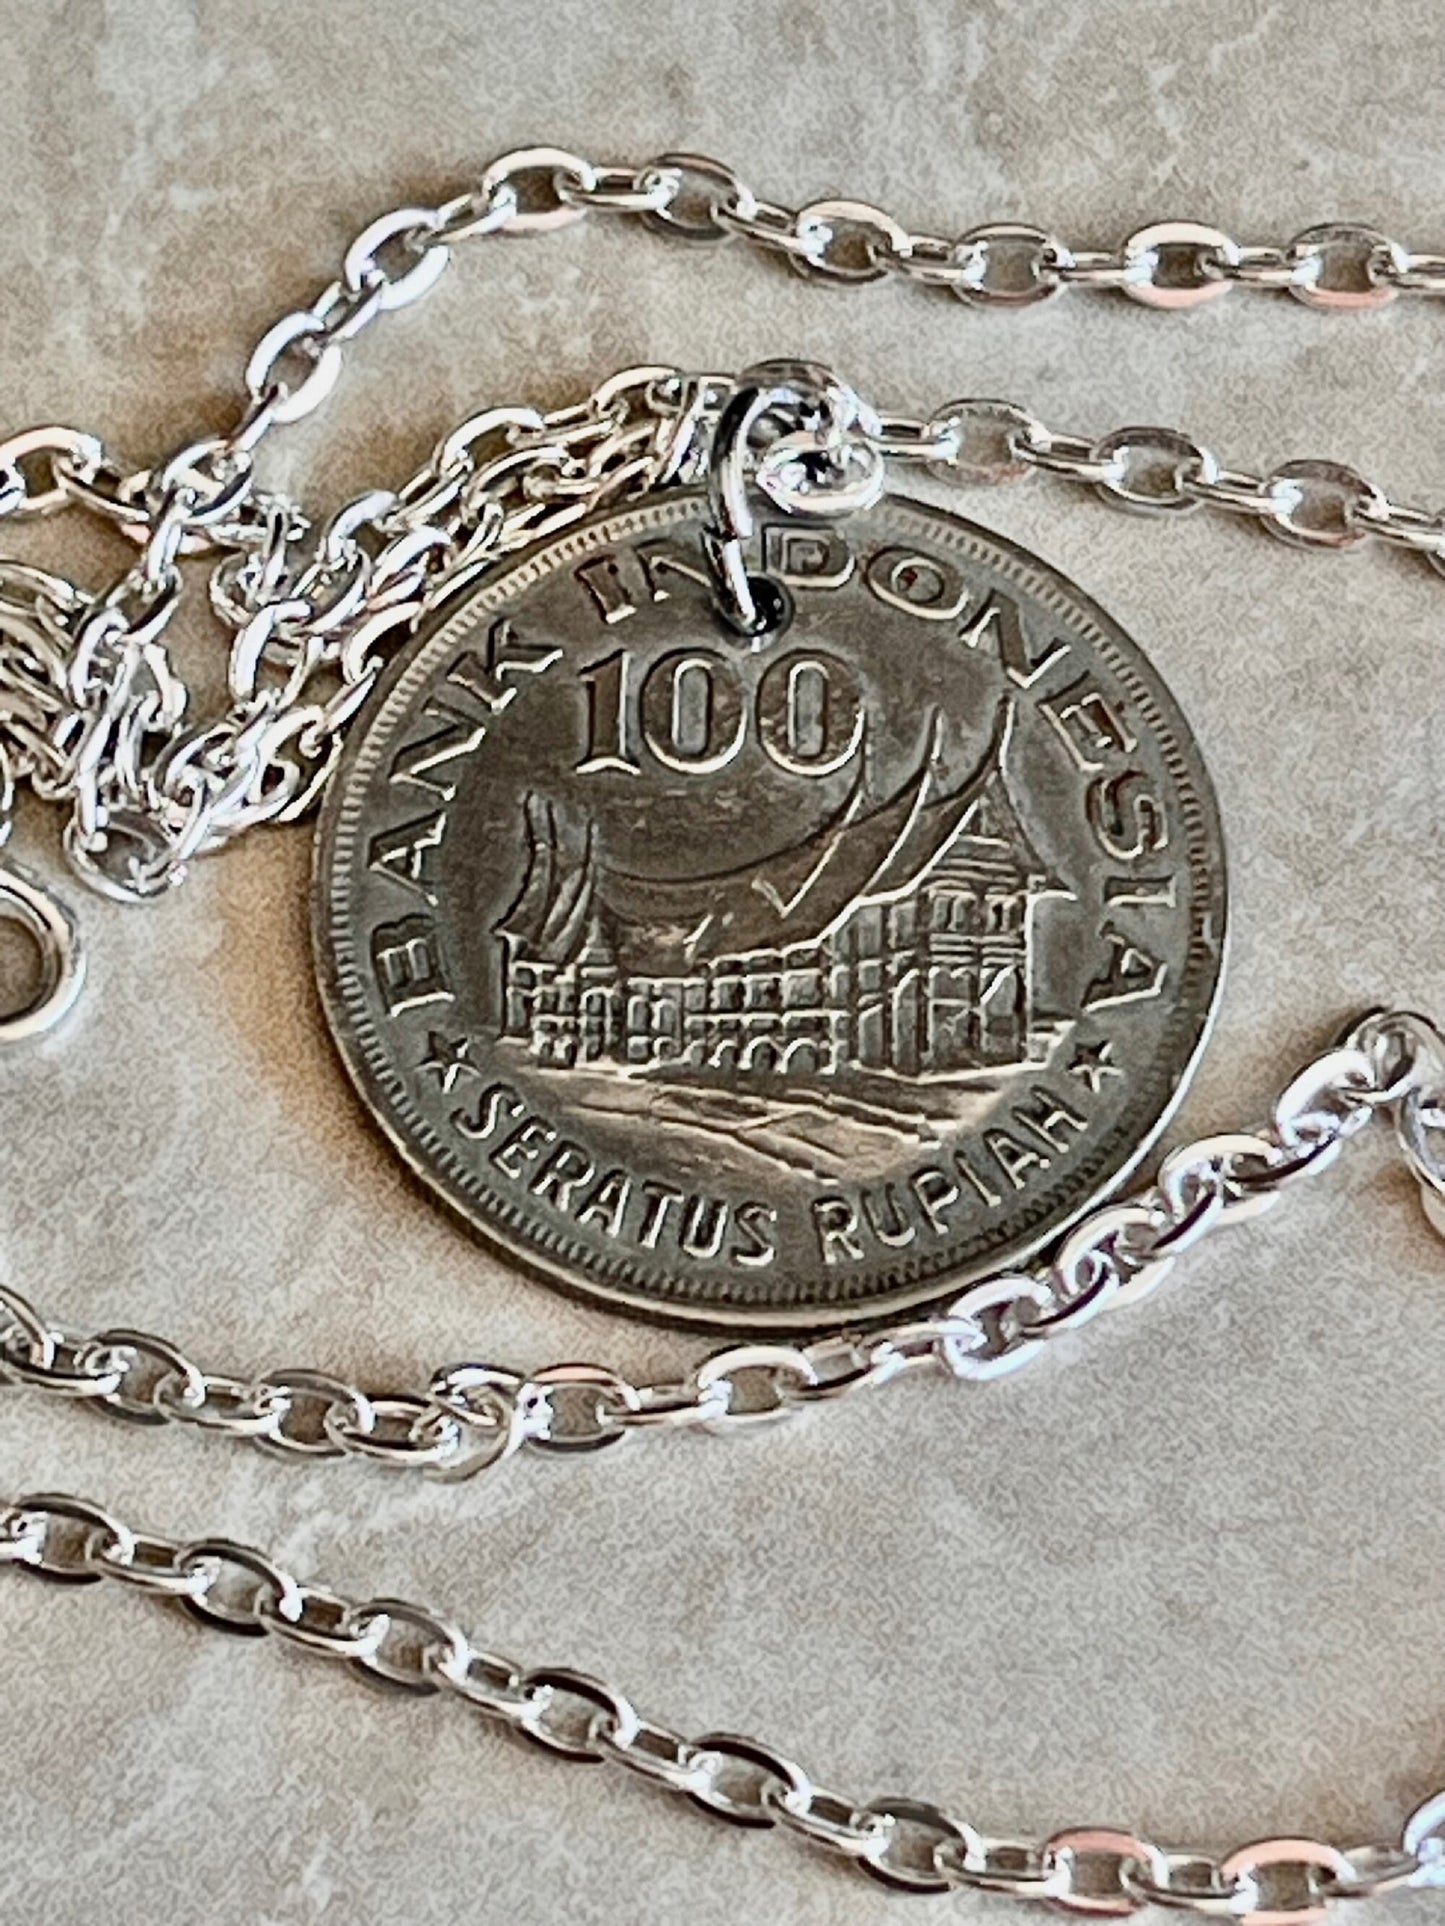 Indonesia Pendant Necklace Indonesian 100 Rupiah Coin Personal Vintage Handmade Jewelry Gift Friend Charm For Him Her World Coin Collector